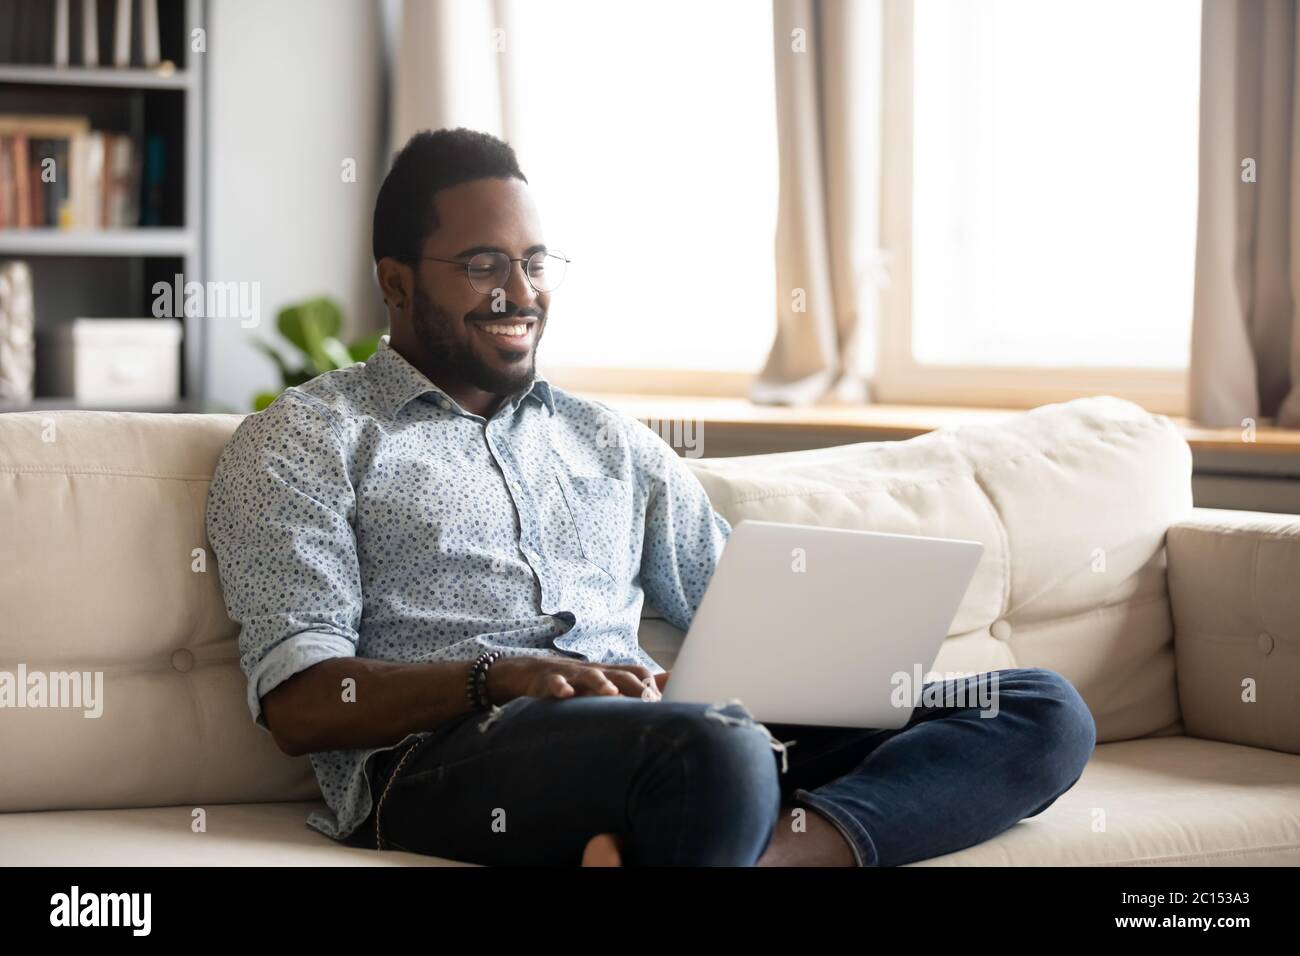 African man sitting on couch smile looking movie using laptop Stock Photo